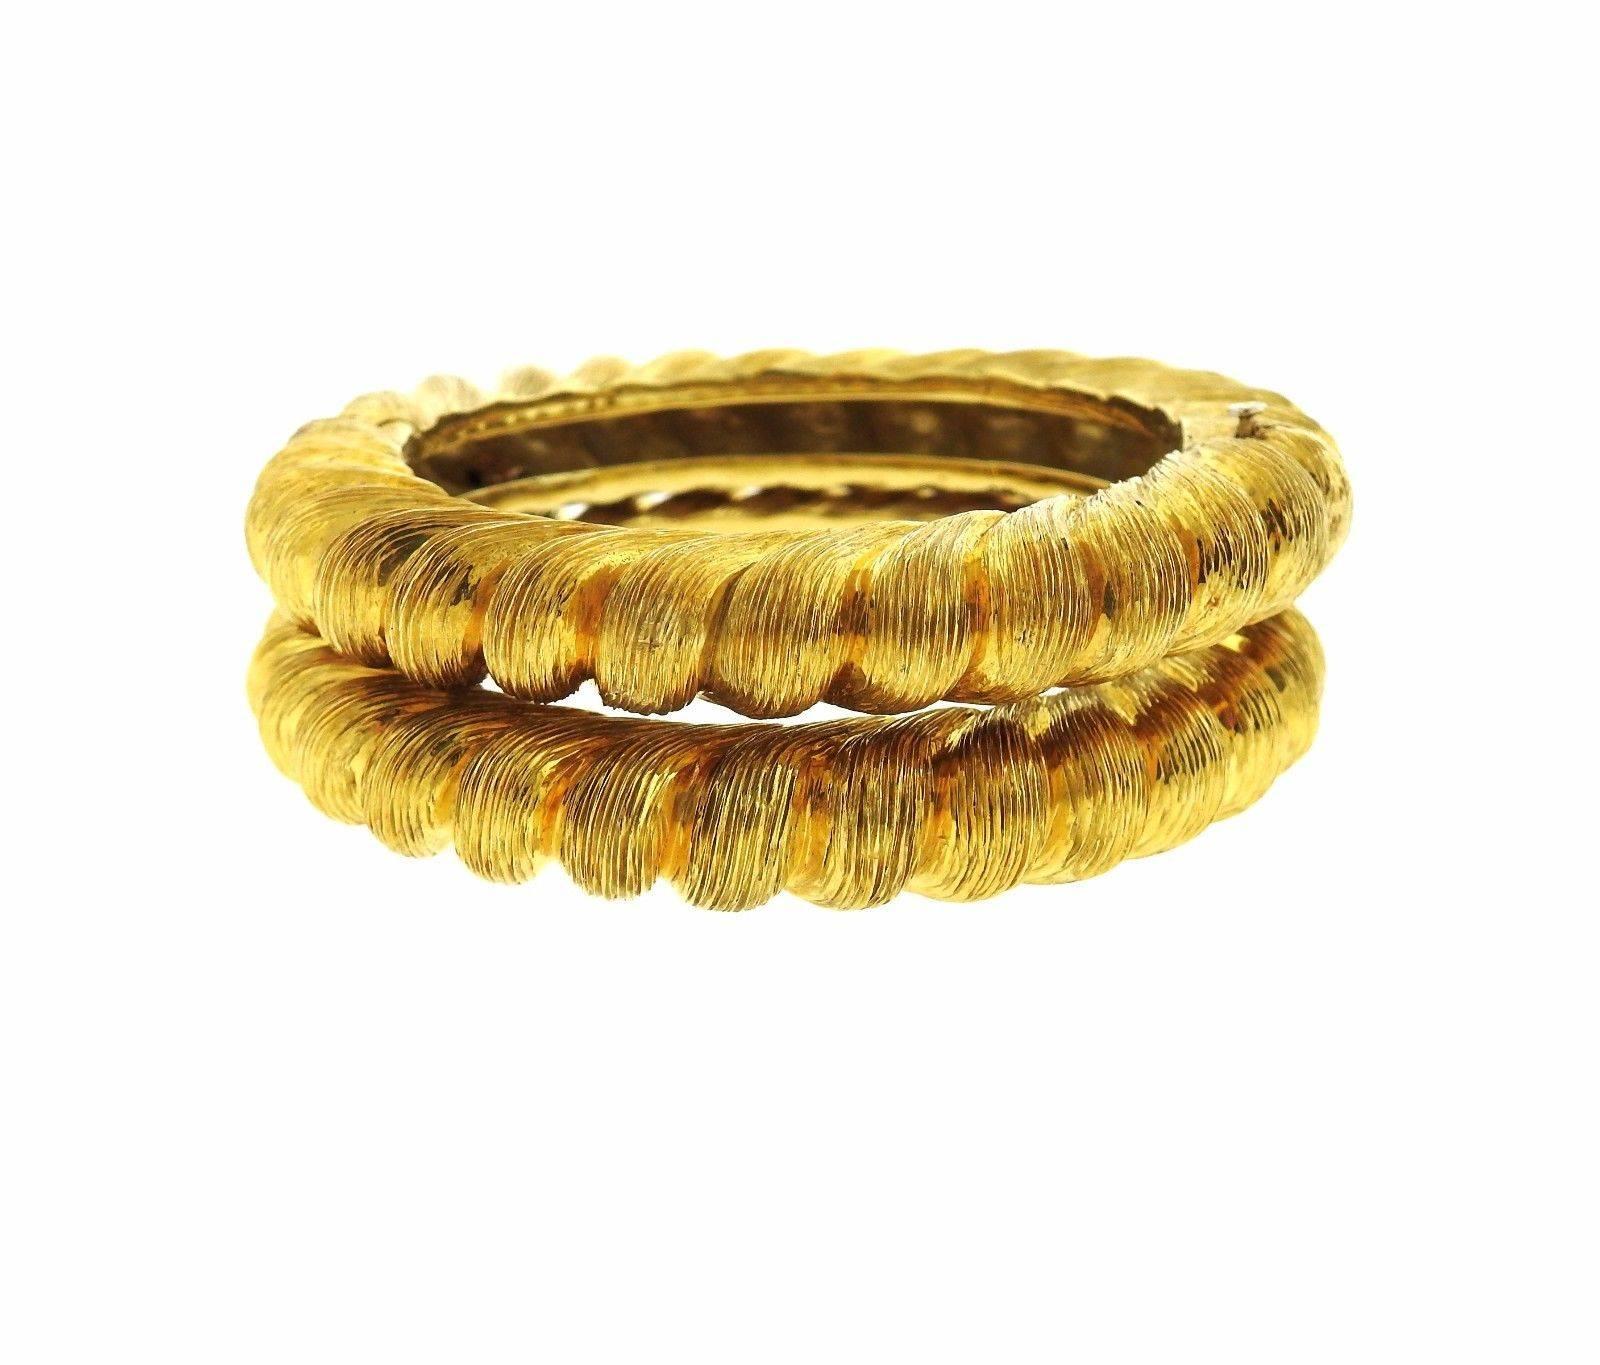 A pair of 18k yellow gold bangle bracelets by Tiffany & Co.  The bracelets will fit up to a 6 1/2